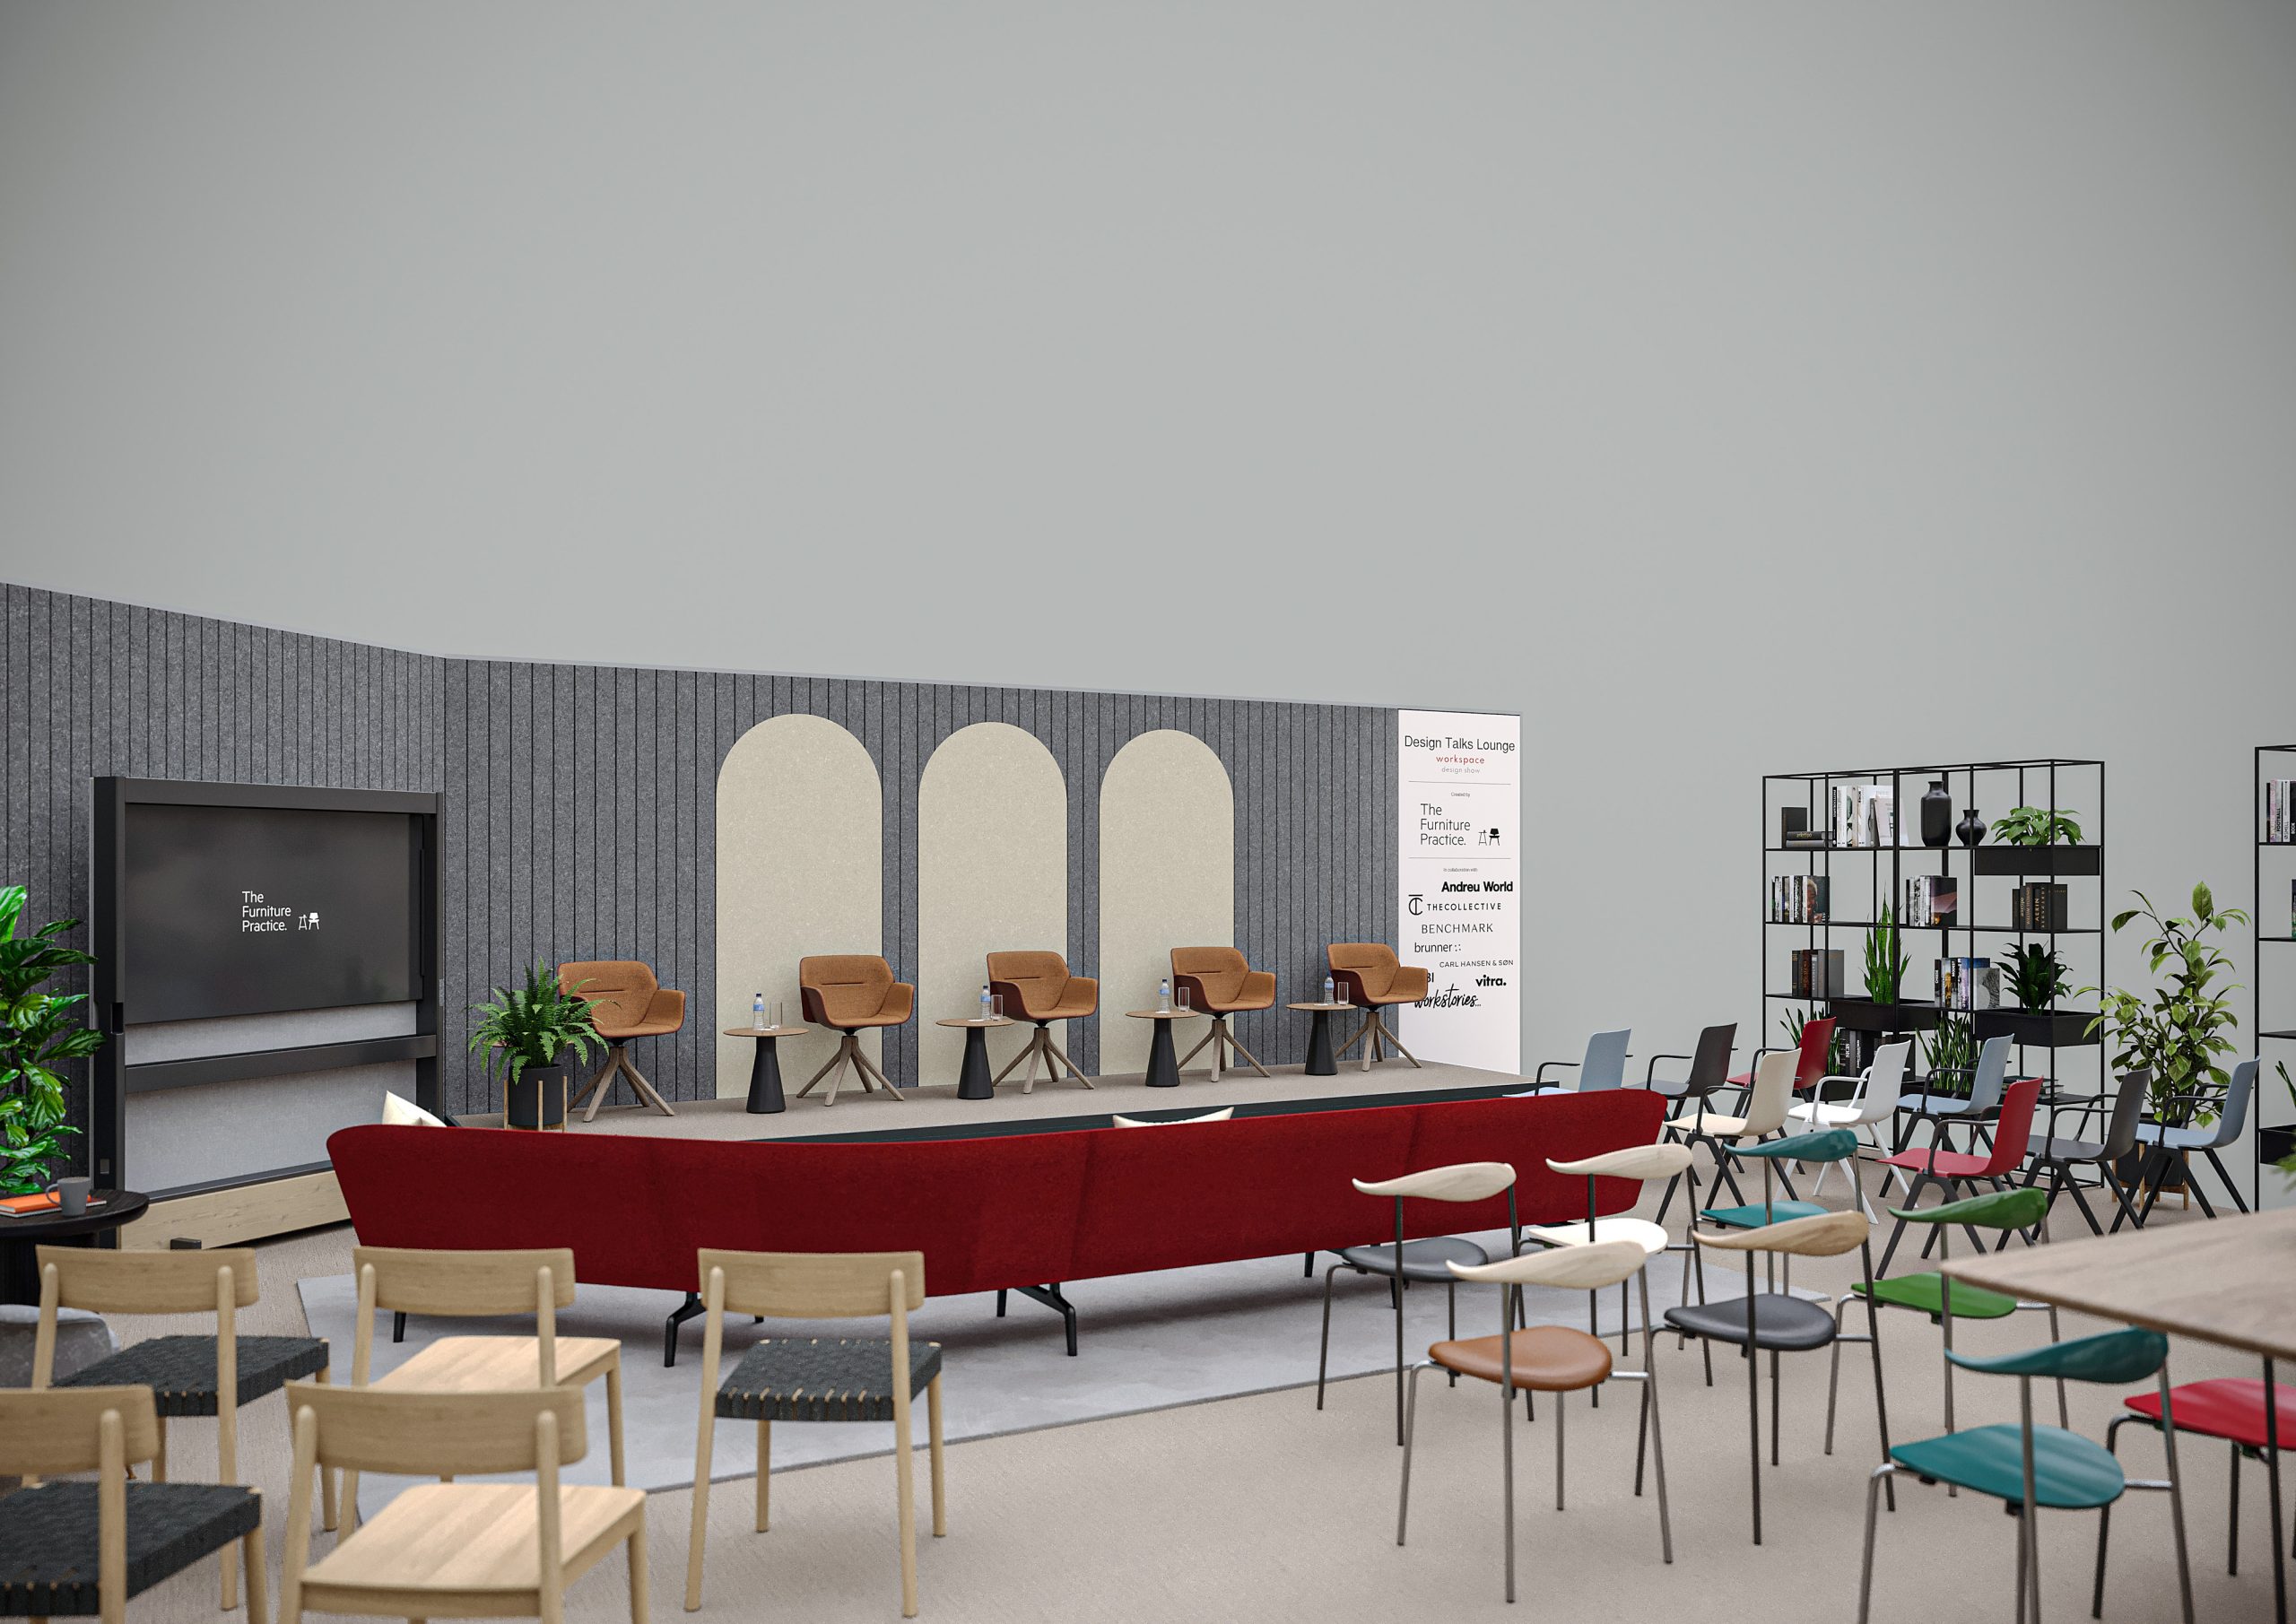 Just two weeks to go until the inaugural Workspace Design Show @WorkspaceShowUK